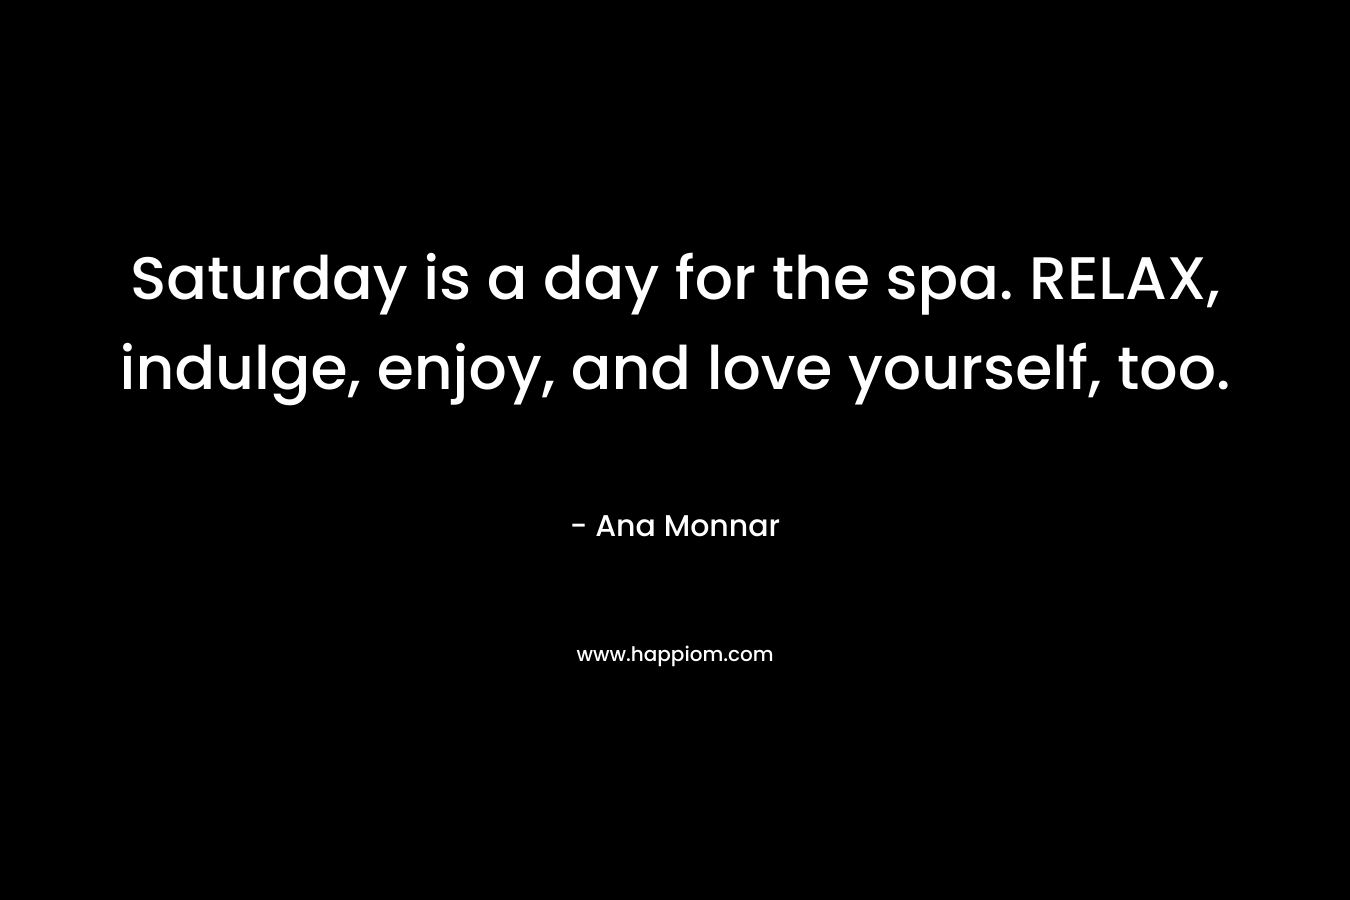 Saturday is a day for the spa. RELAX, indulge, enjoy, and love yourself, too. – Ana Monnar